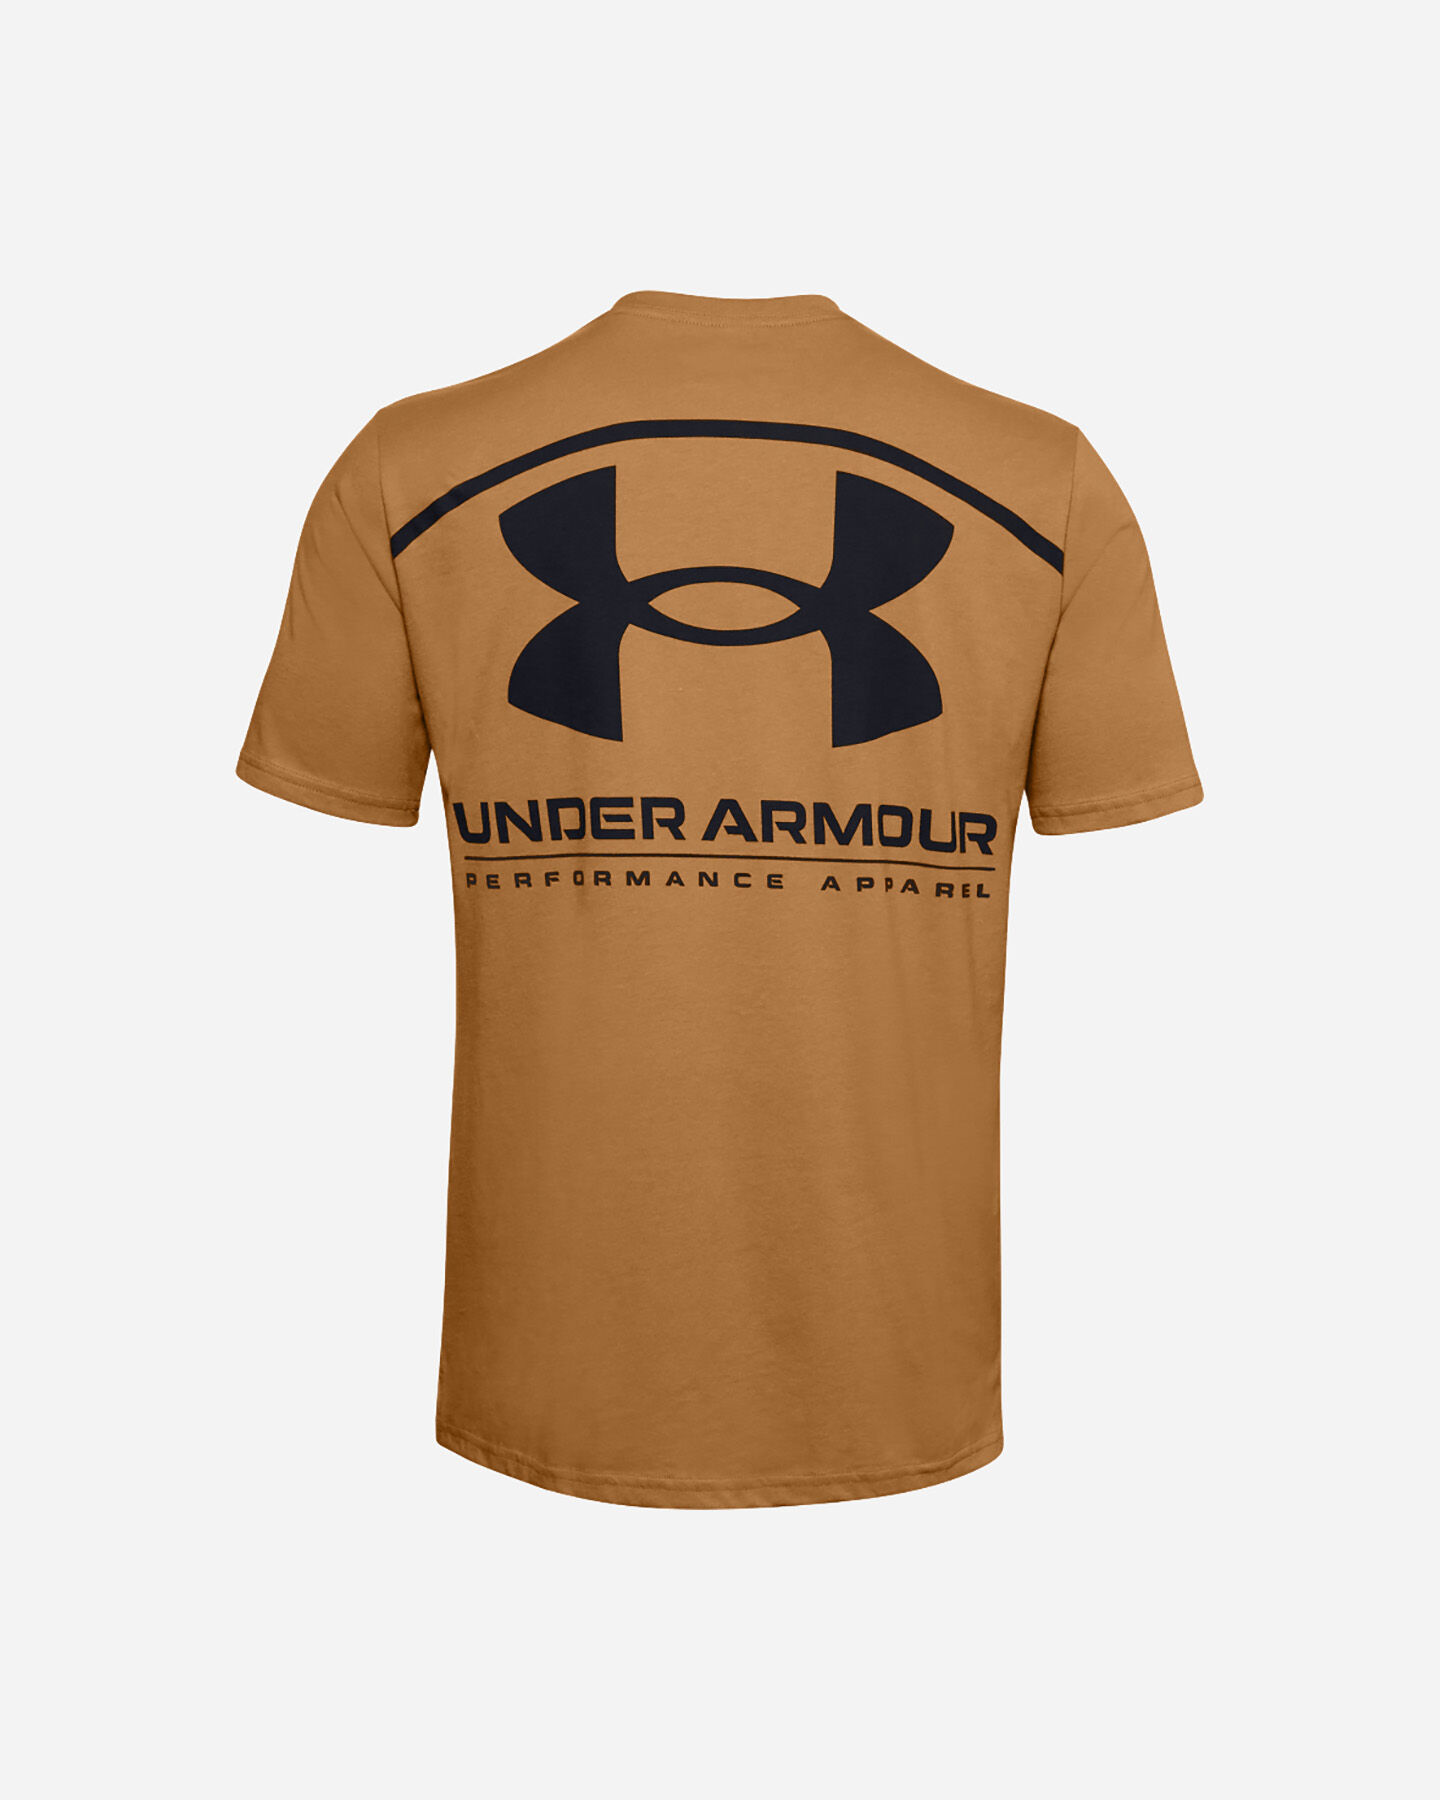  T-Shirt UNDER ARMOUR BIG LOGO M S5229685|0707|XS scatto 1